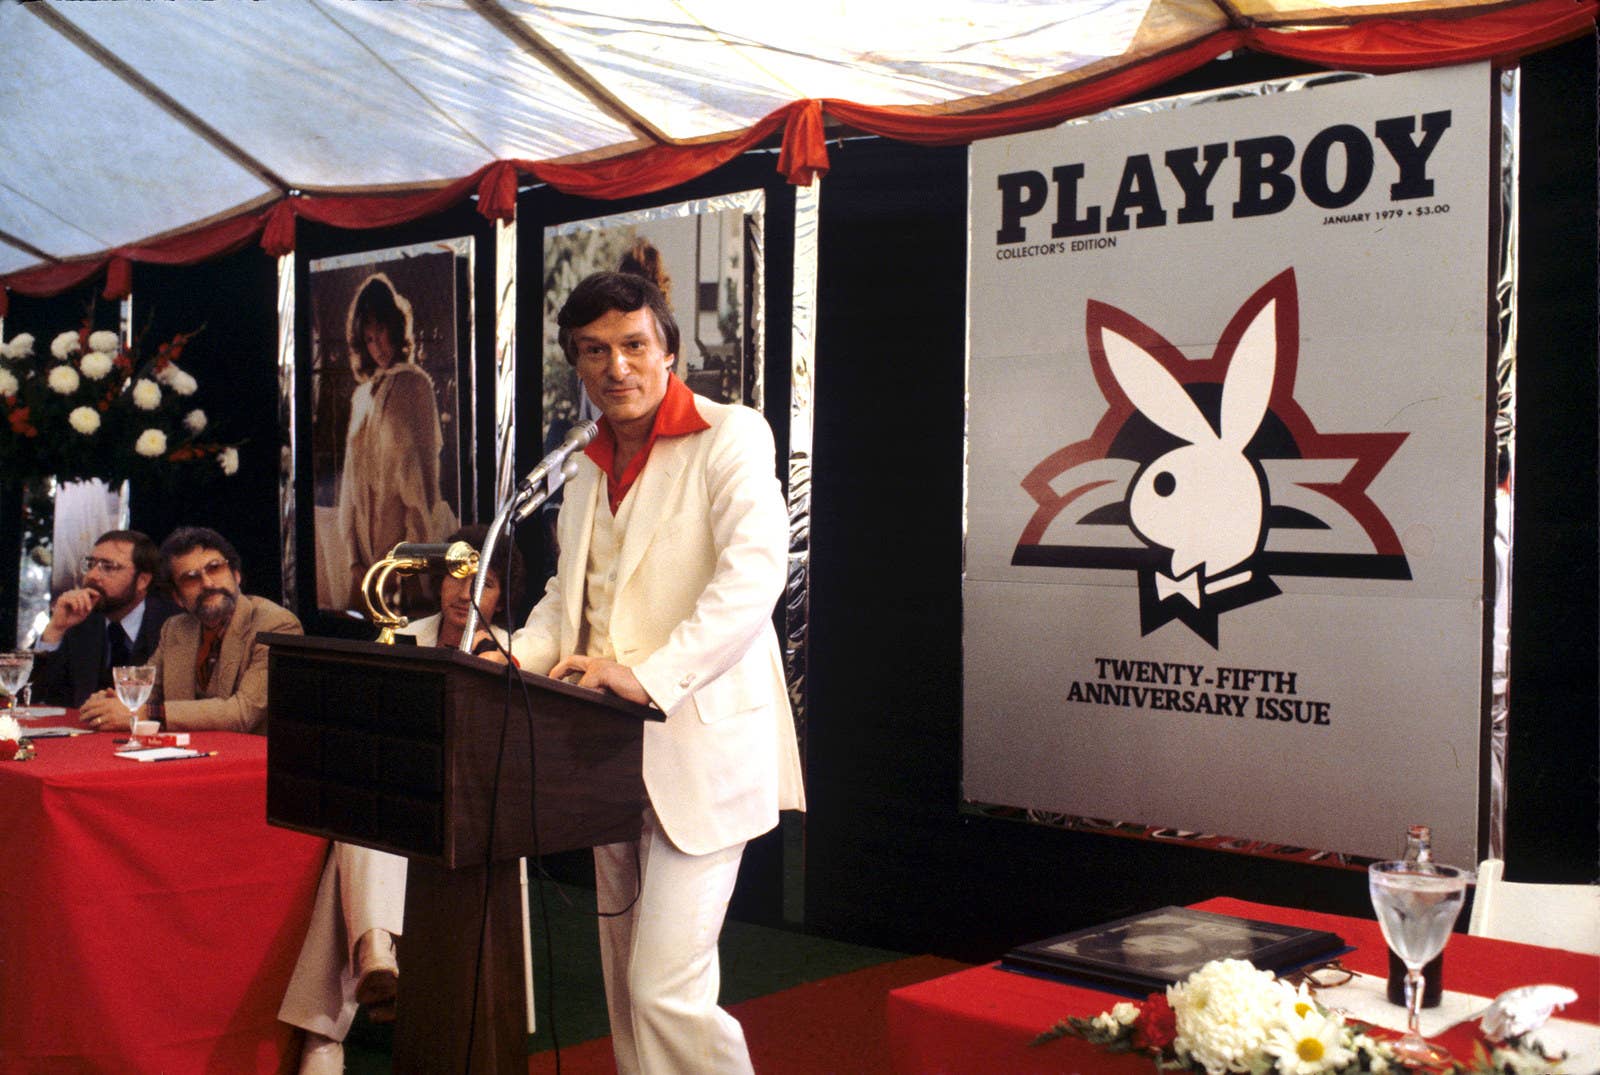 Hefner speaks to an audience during the release party for the Playboy 25th anniversary issue in 1979.